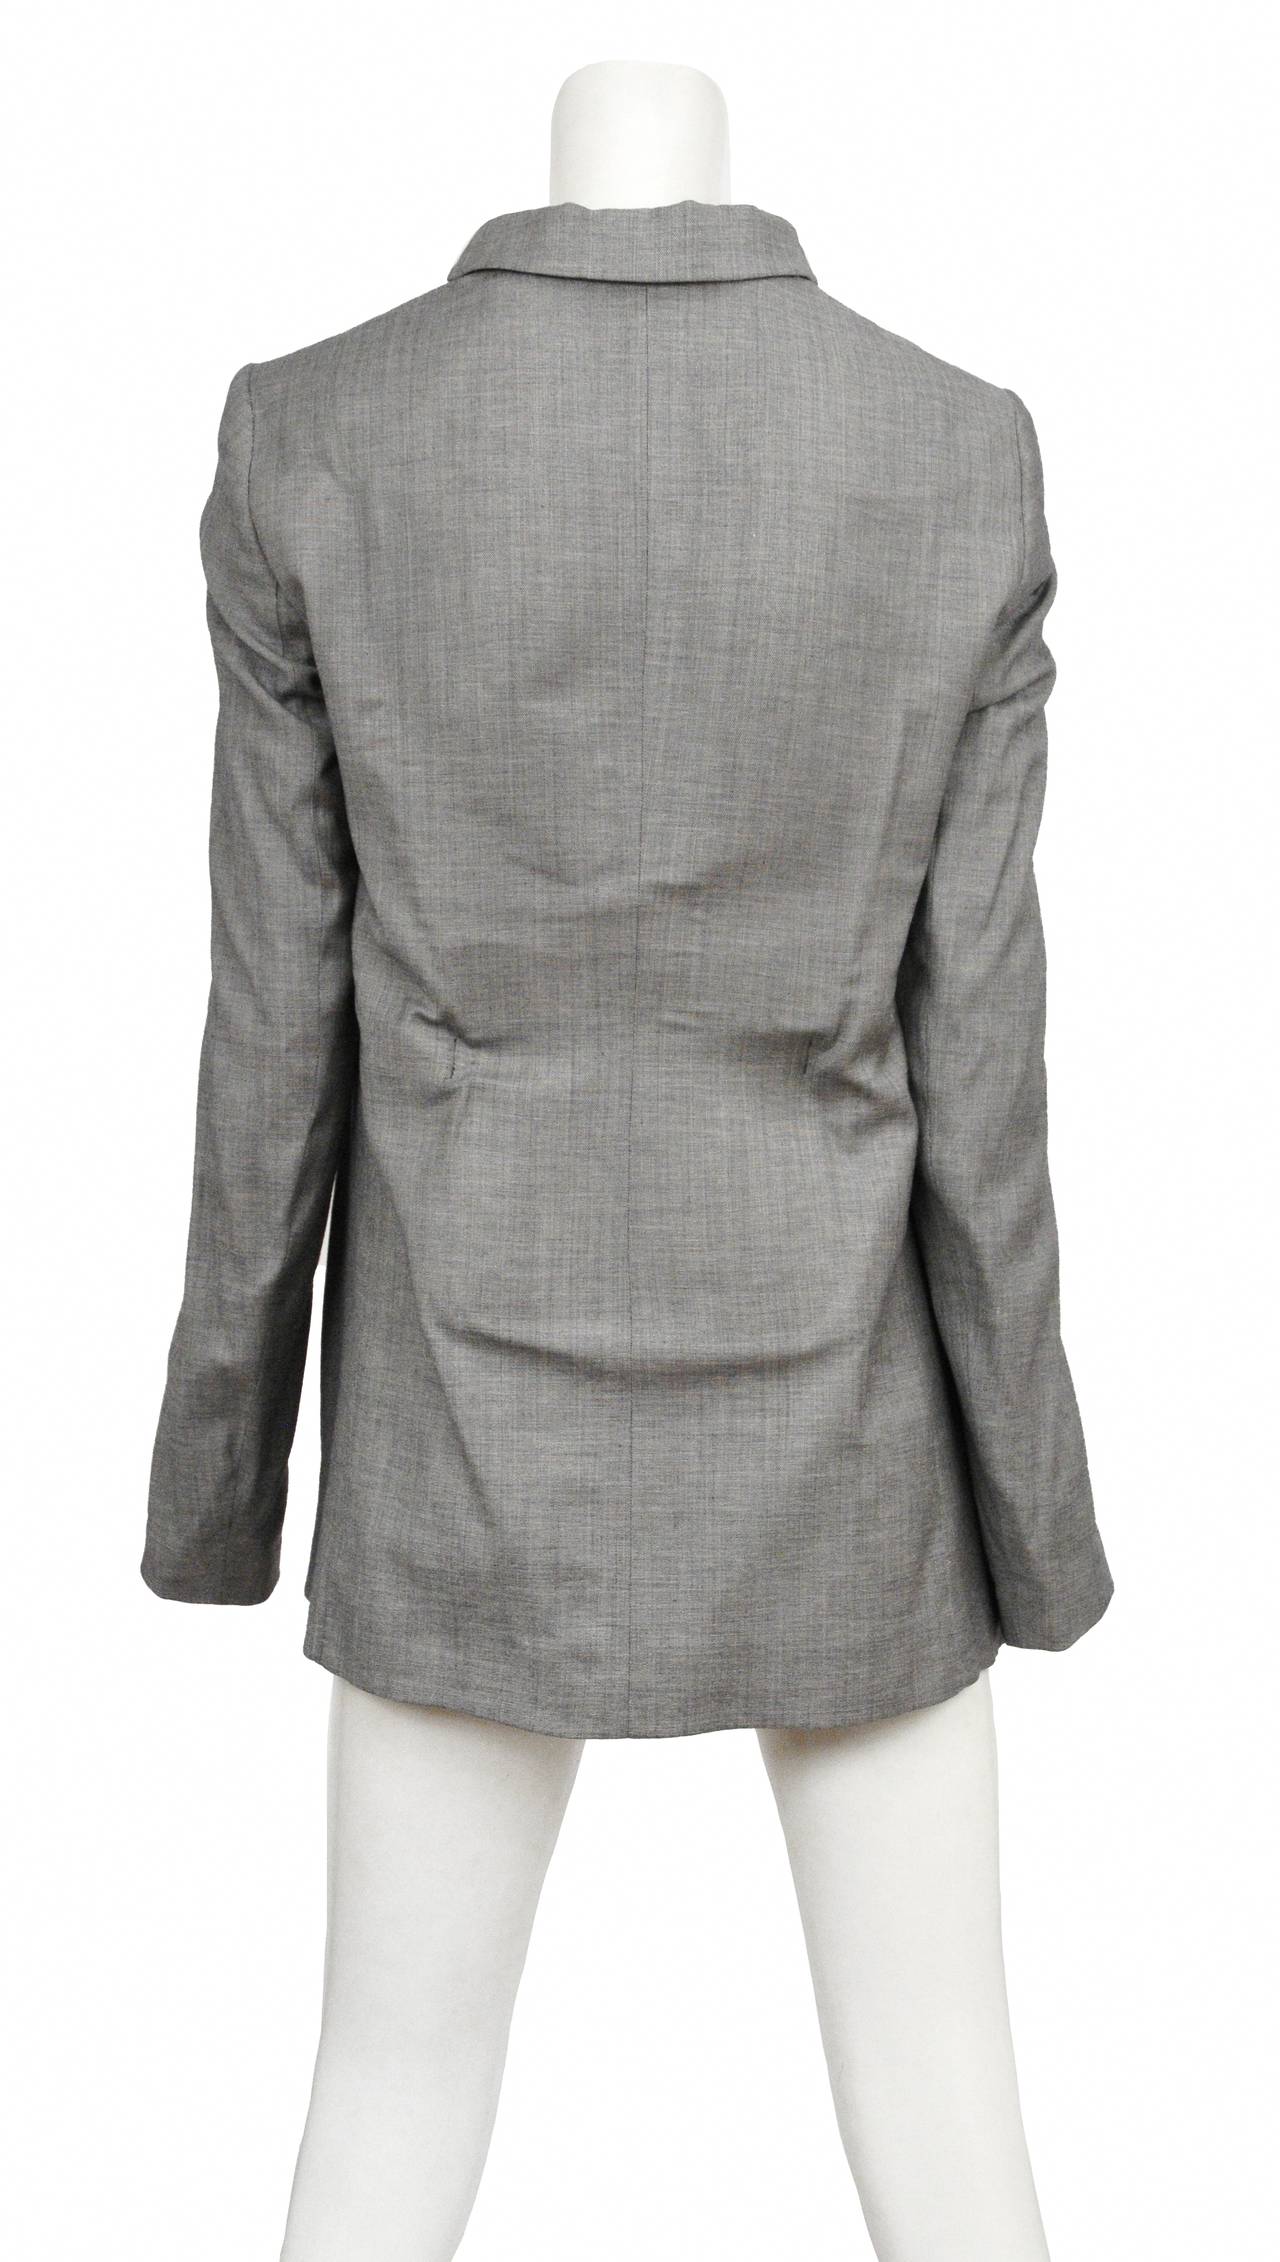 Vintage Maison Martin Margiela grey blazer featuring a structured back with a plate like piece beneath the fabric. The jacket has lightly padded nude colored shoulders, a built in waist belt and soft lining.